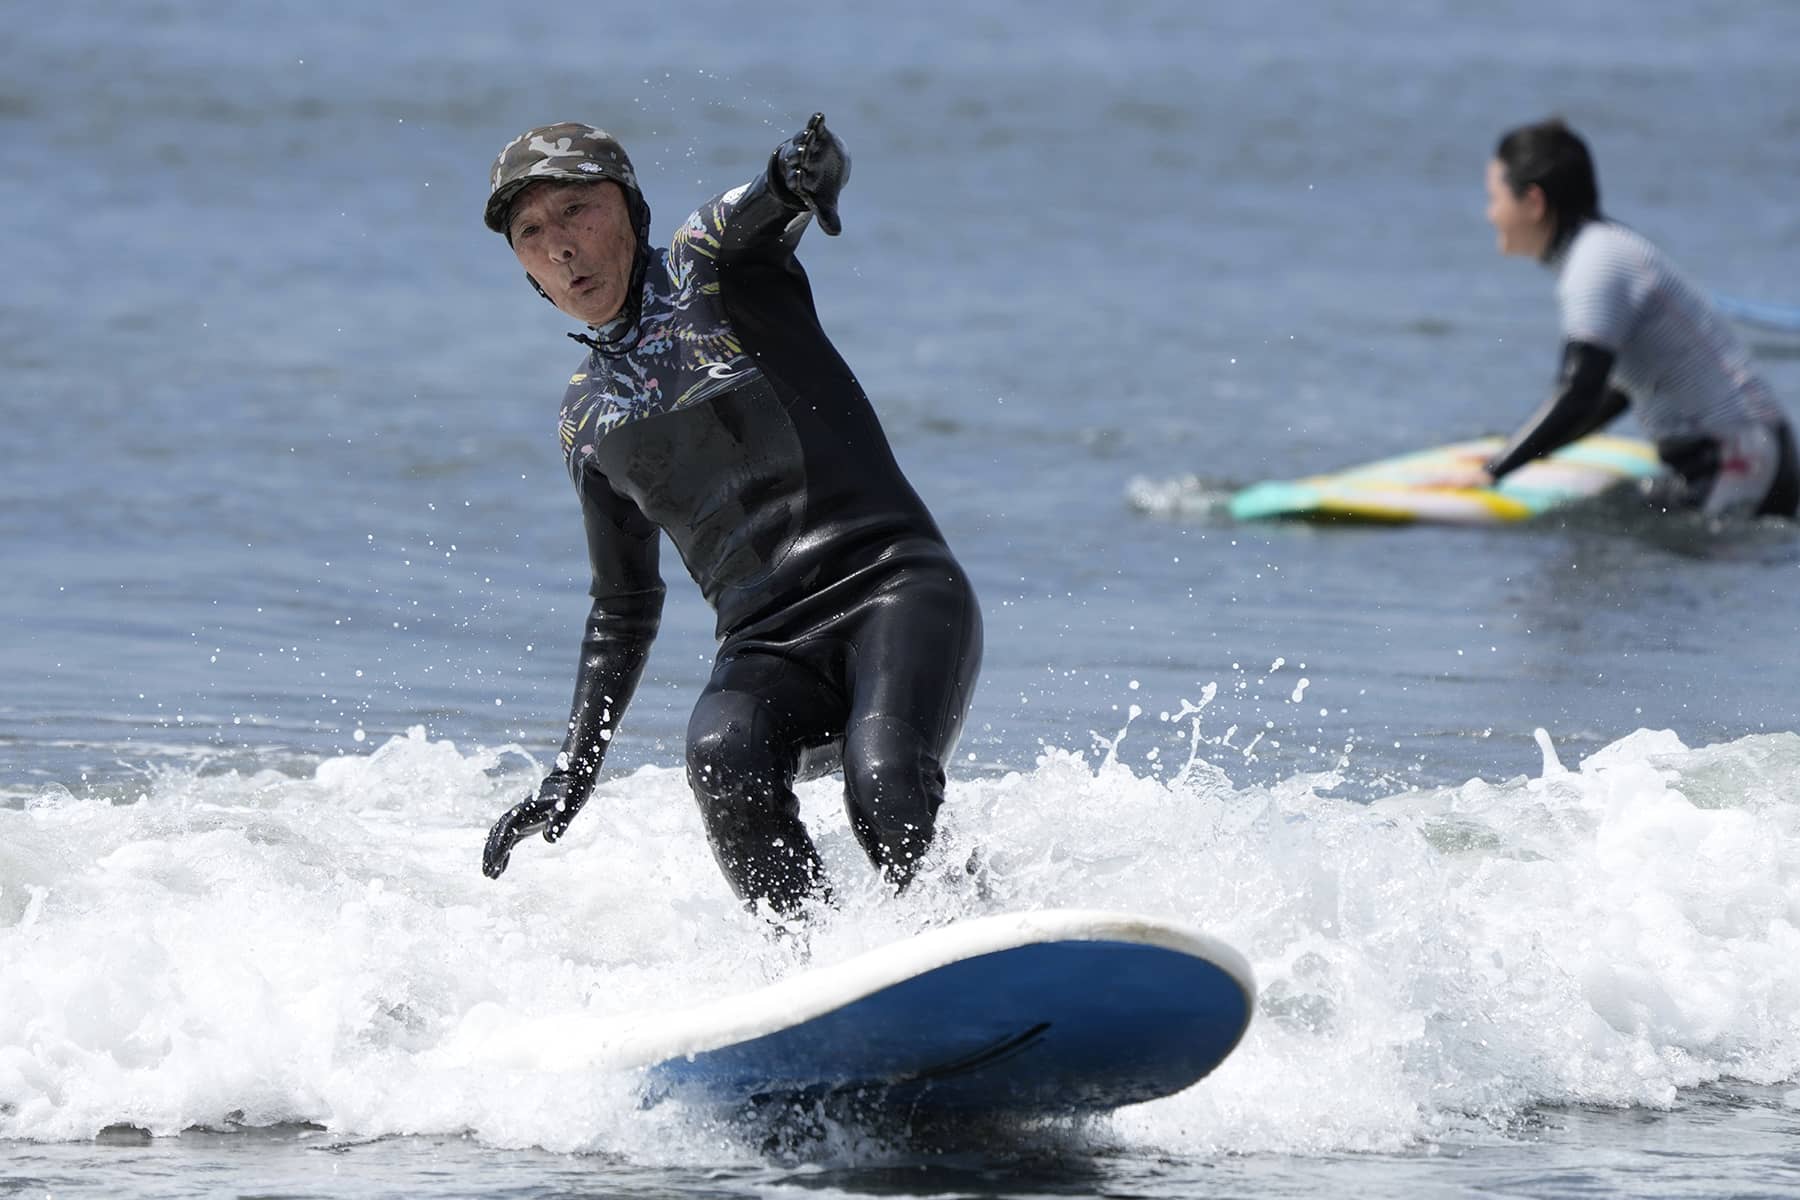 Surfing is life: Senior Japanese surfer inspires Fujisawa's surf culture by  catching waves at 90